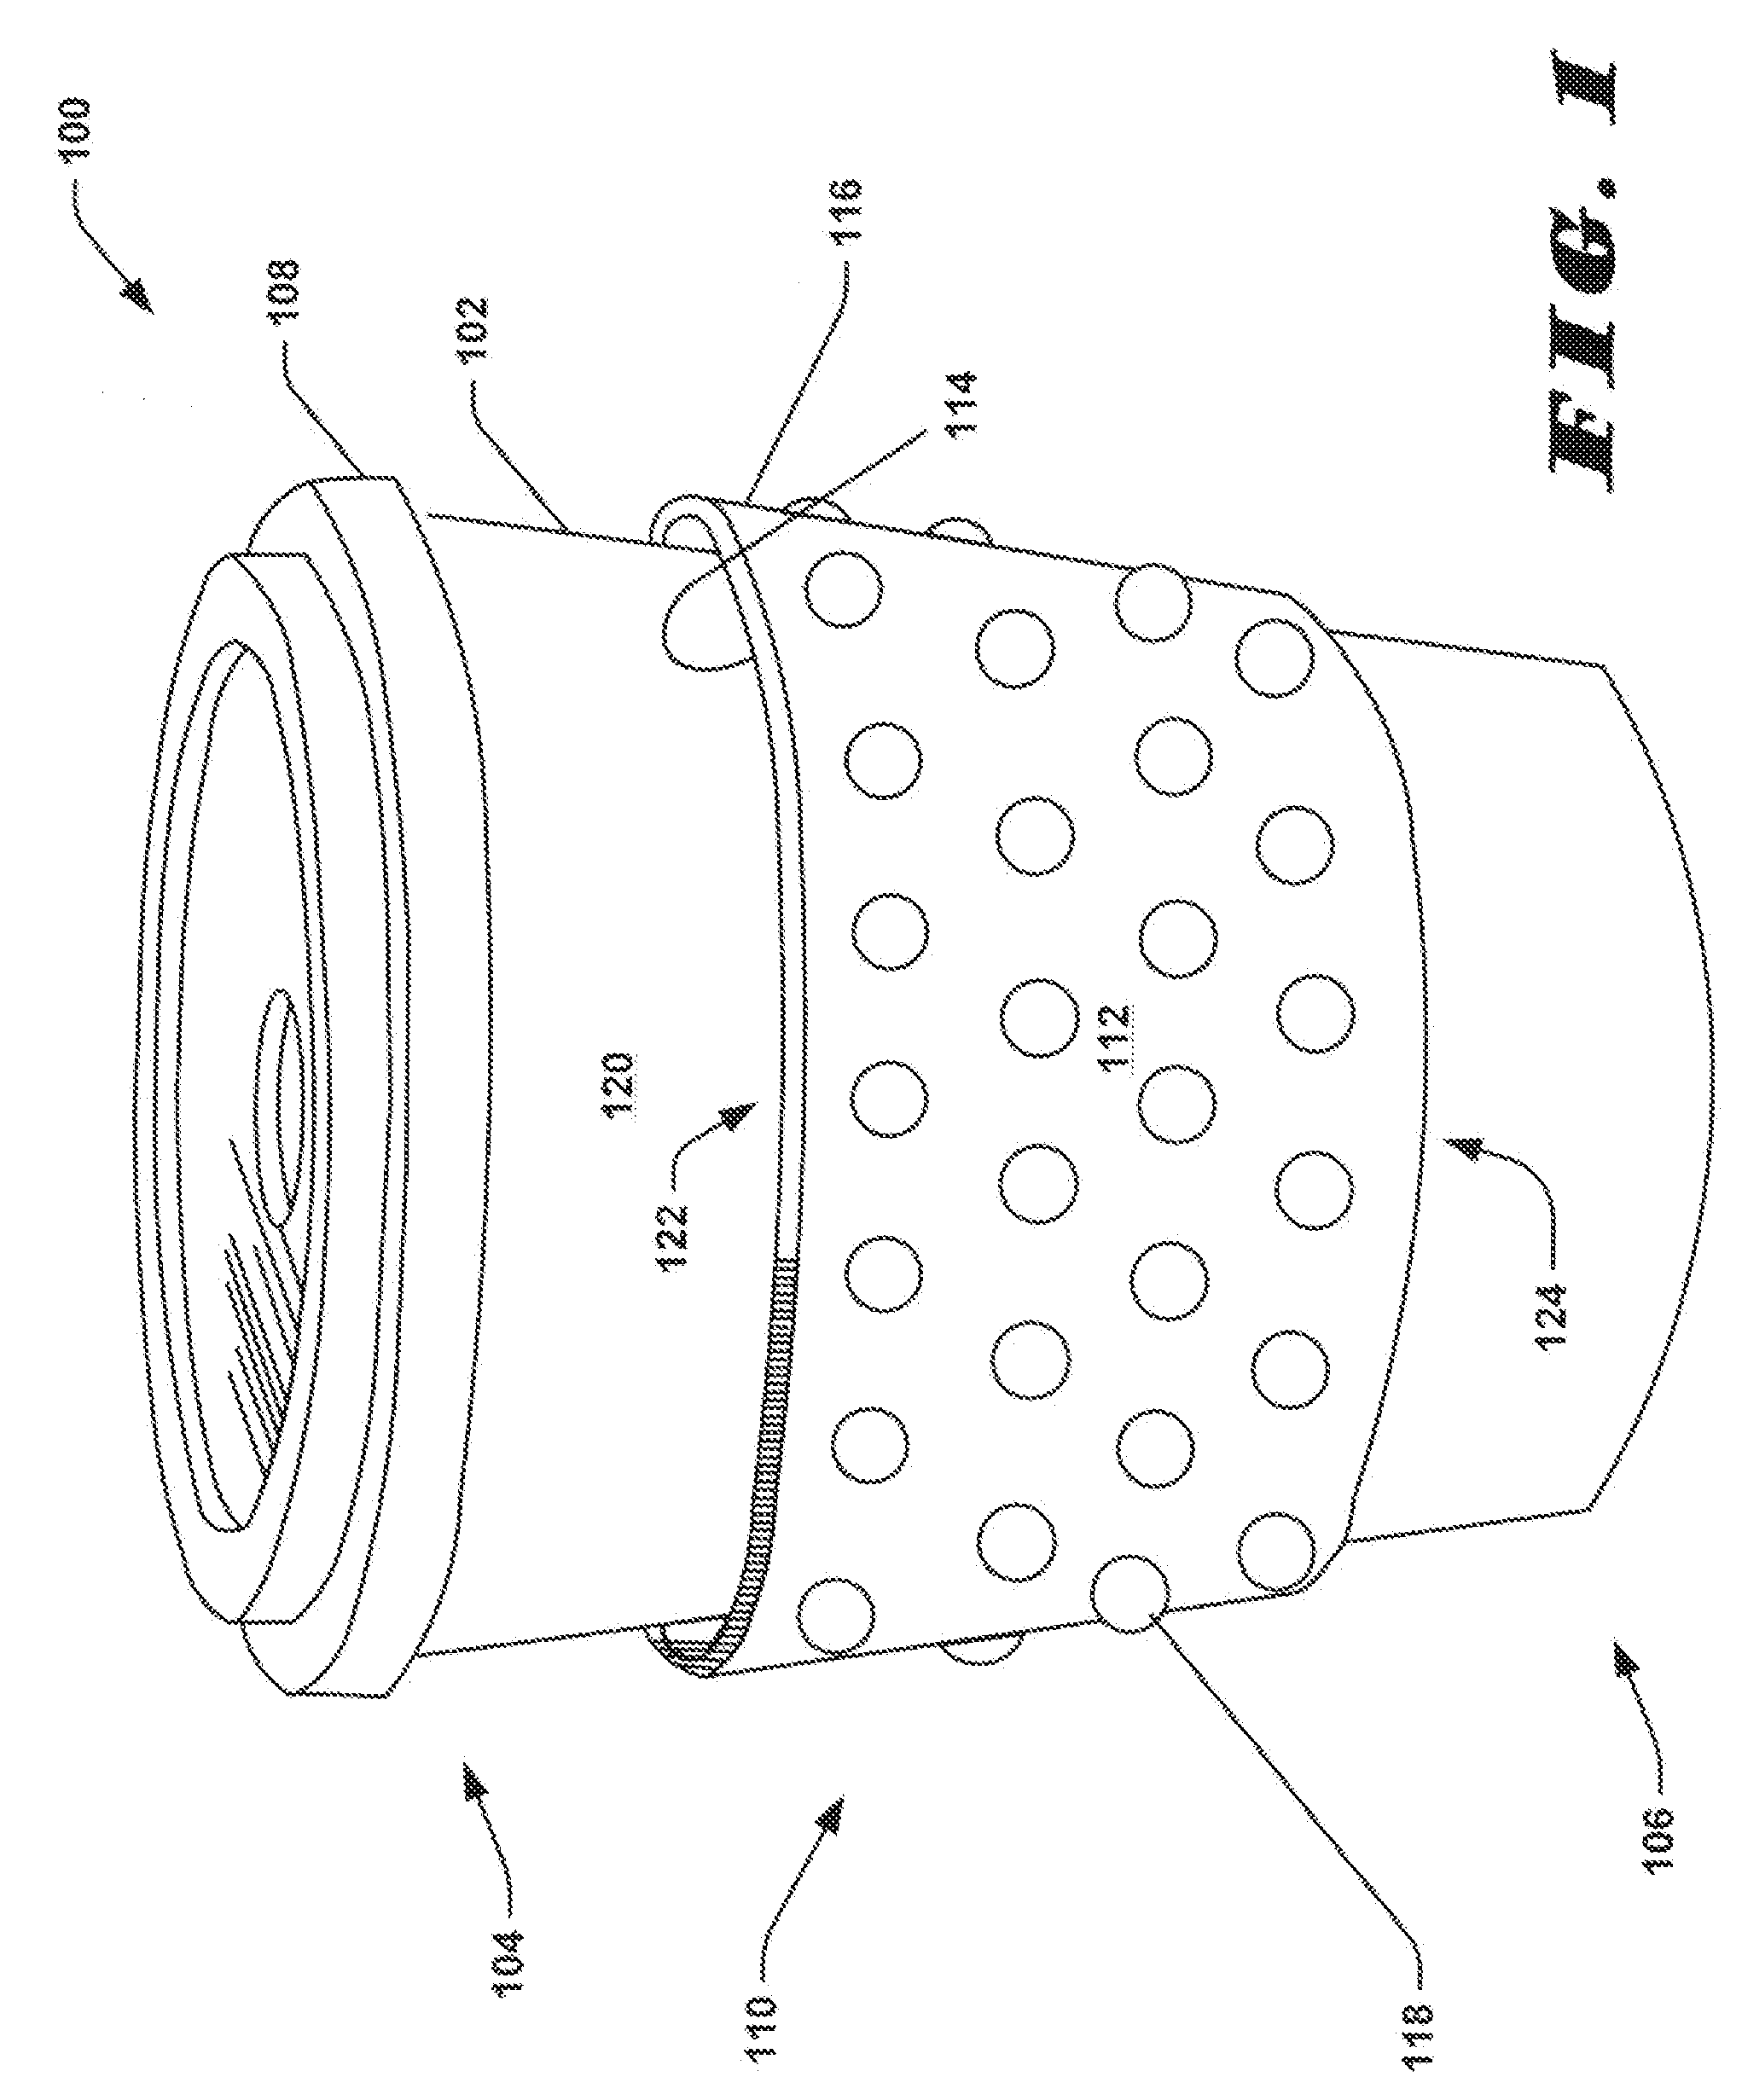 Beverage cup sleeving system and method